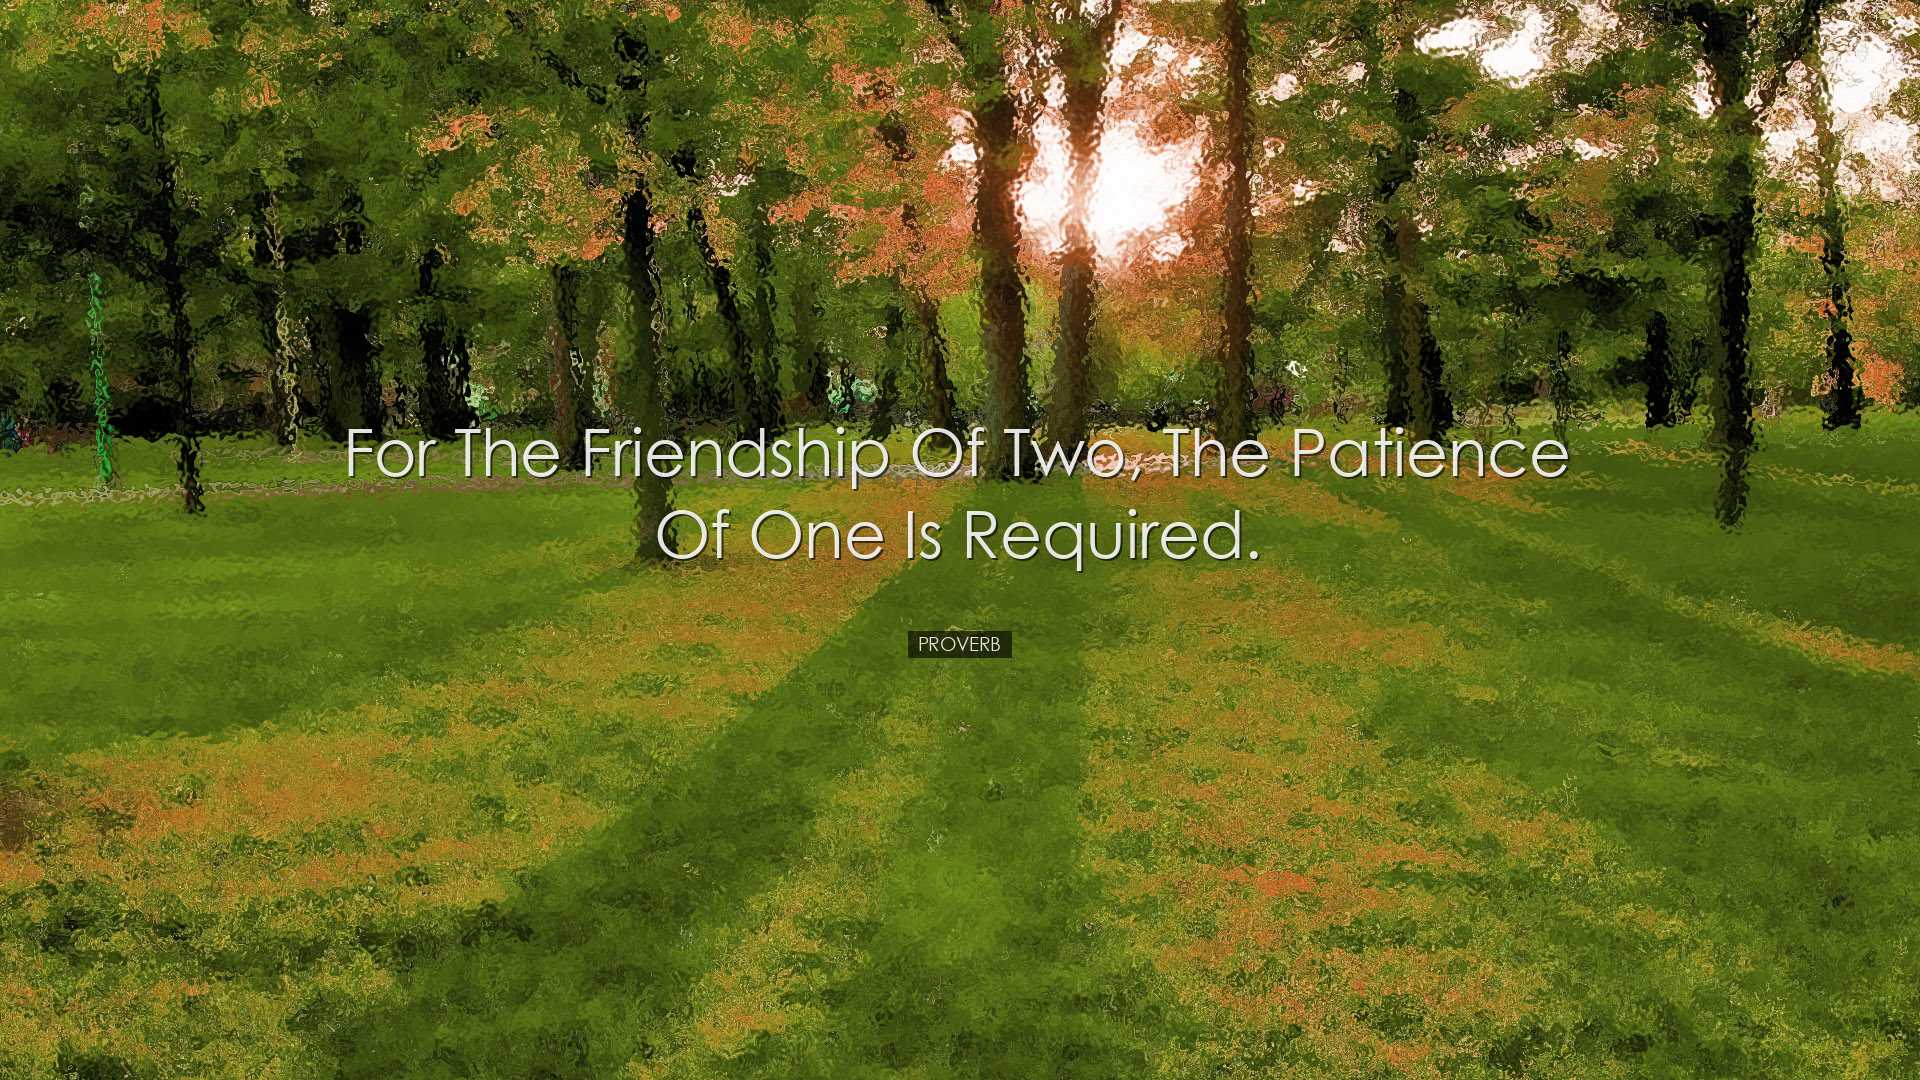 For the friendship of two, the patience of one is required. - Prov